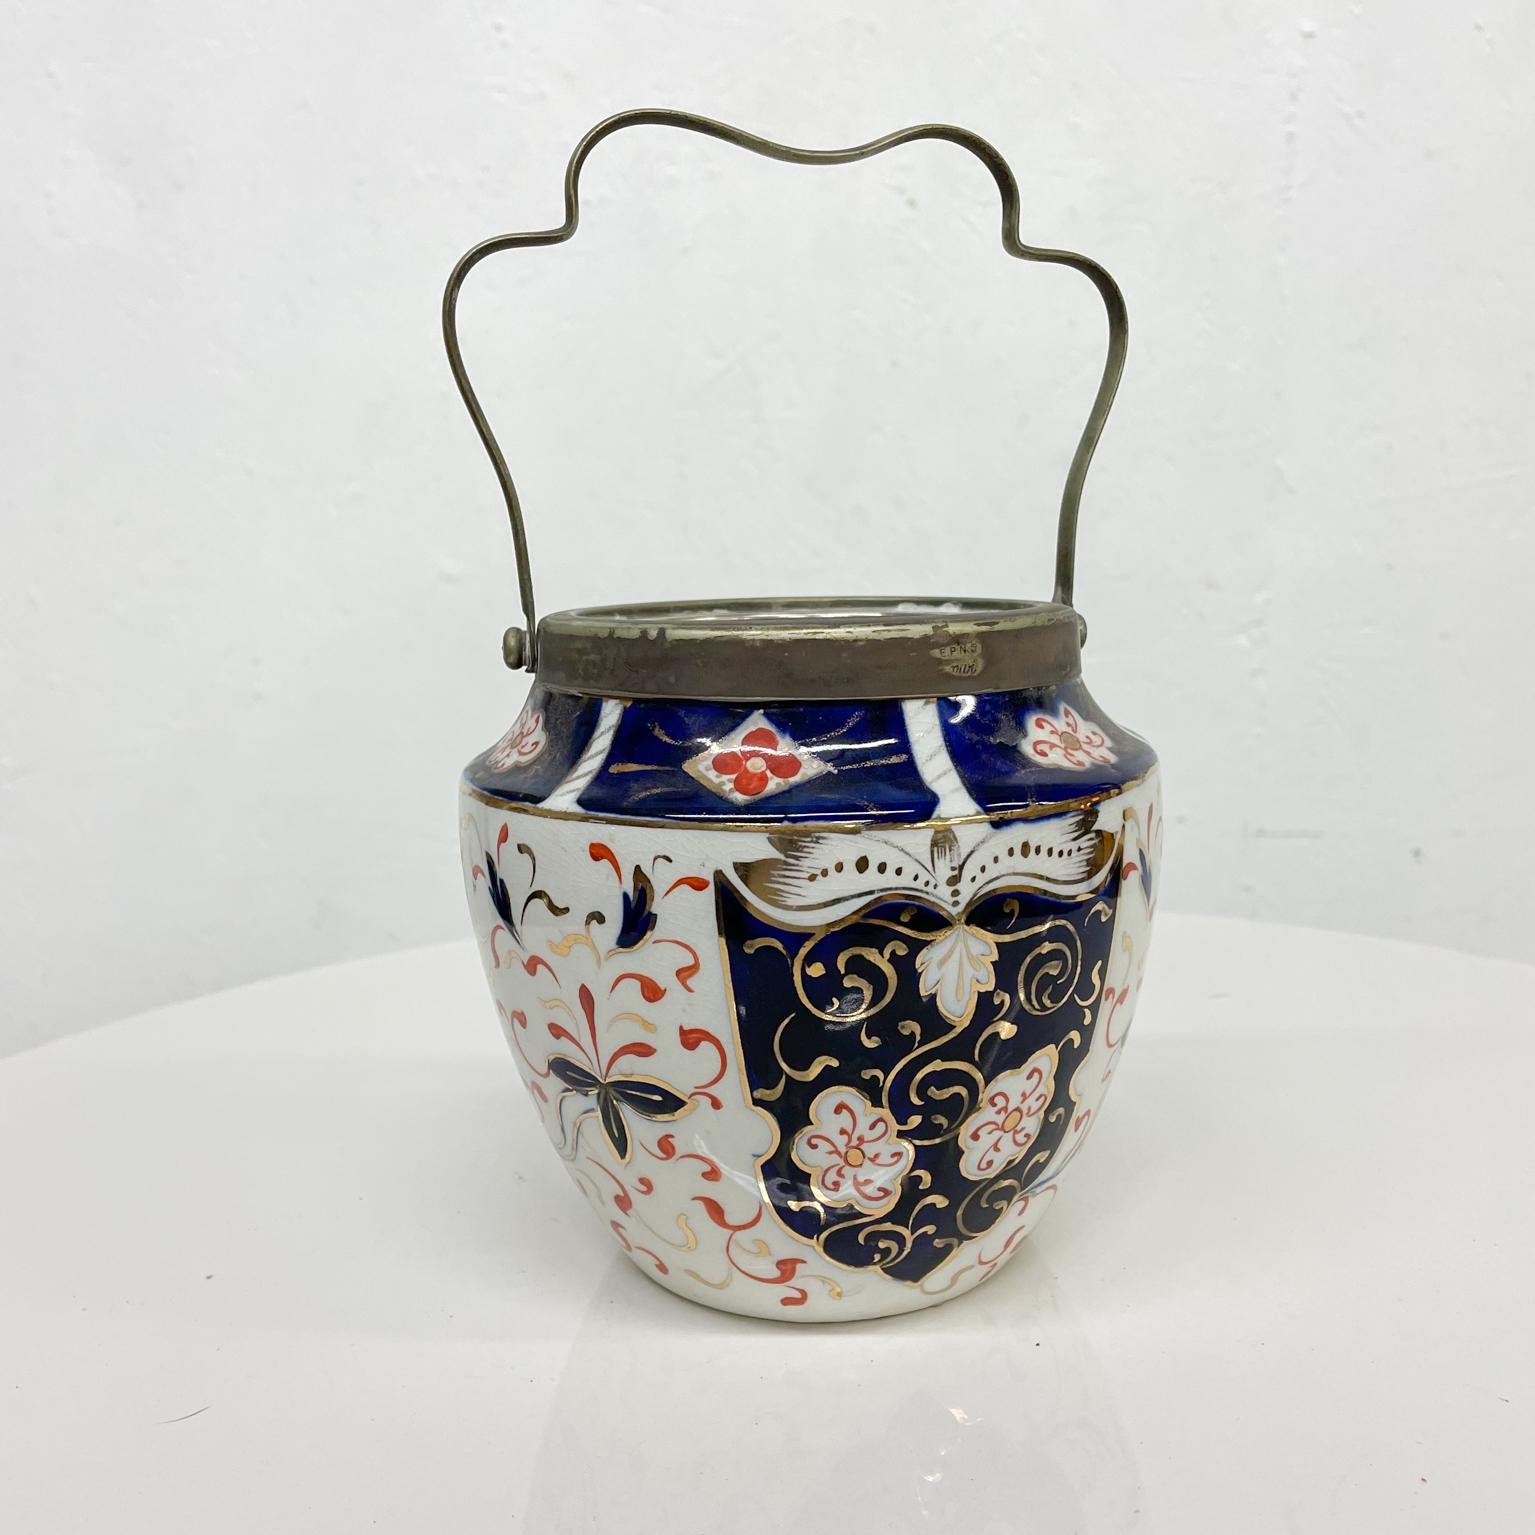 Decorative Vase
Chinese Pottery Lovely Lighthearted Hand Painted Pottery Vase Vessel signed Art
Features silverplated sculptural handle.
6 diameter 5.5 h, 9 h w/ handle
Original Vintage unrestored damaged condition: it has a hairline crack at